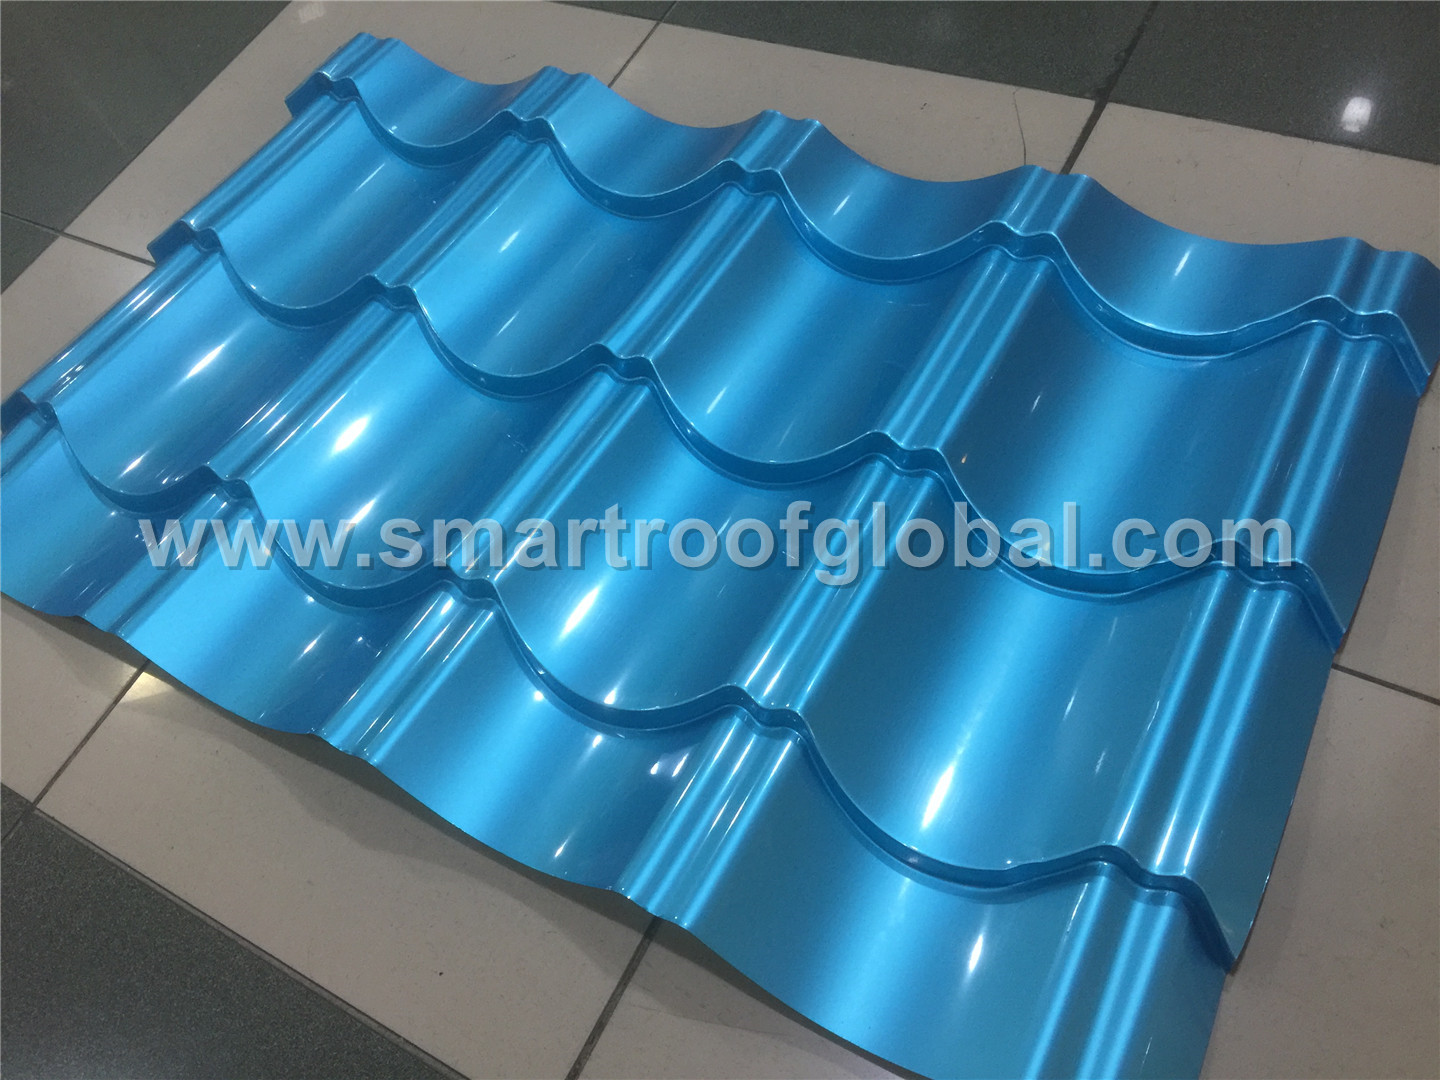 2020 Latest Design Metal Sheeting For Walls - Metal Sheets – Smartroof